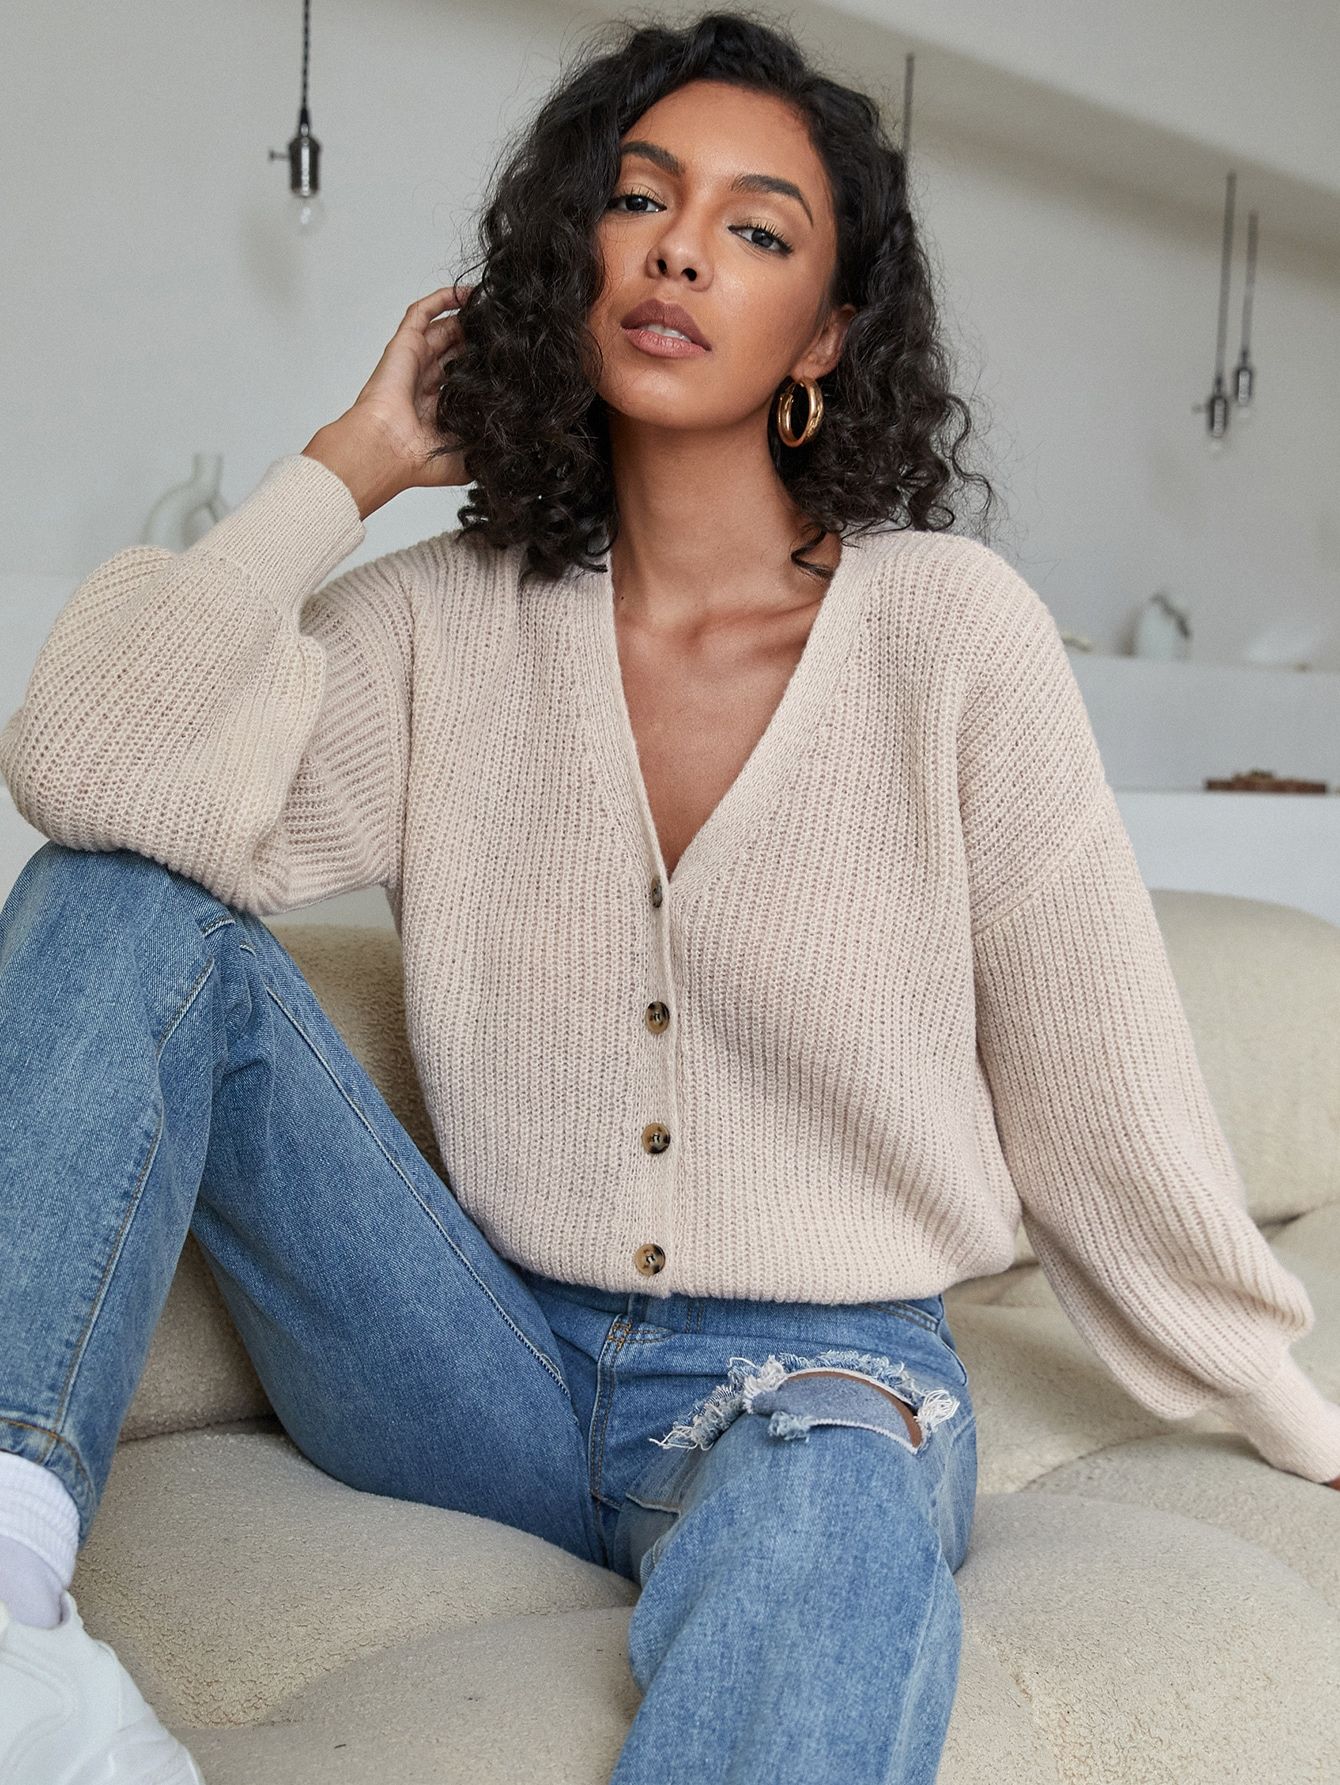 How to Style Short Cardigan: 15 Outfit Ideas for Women to Look Lean